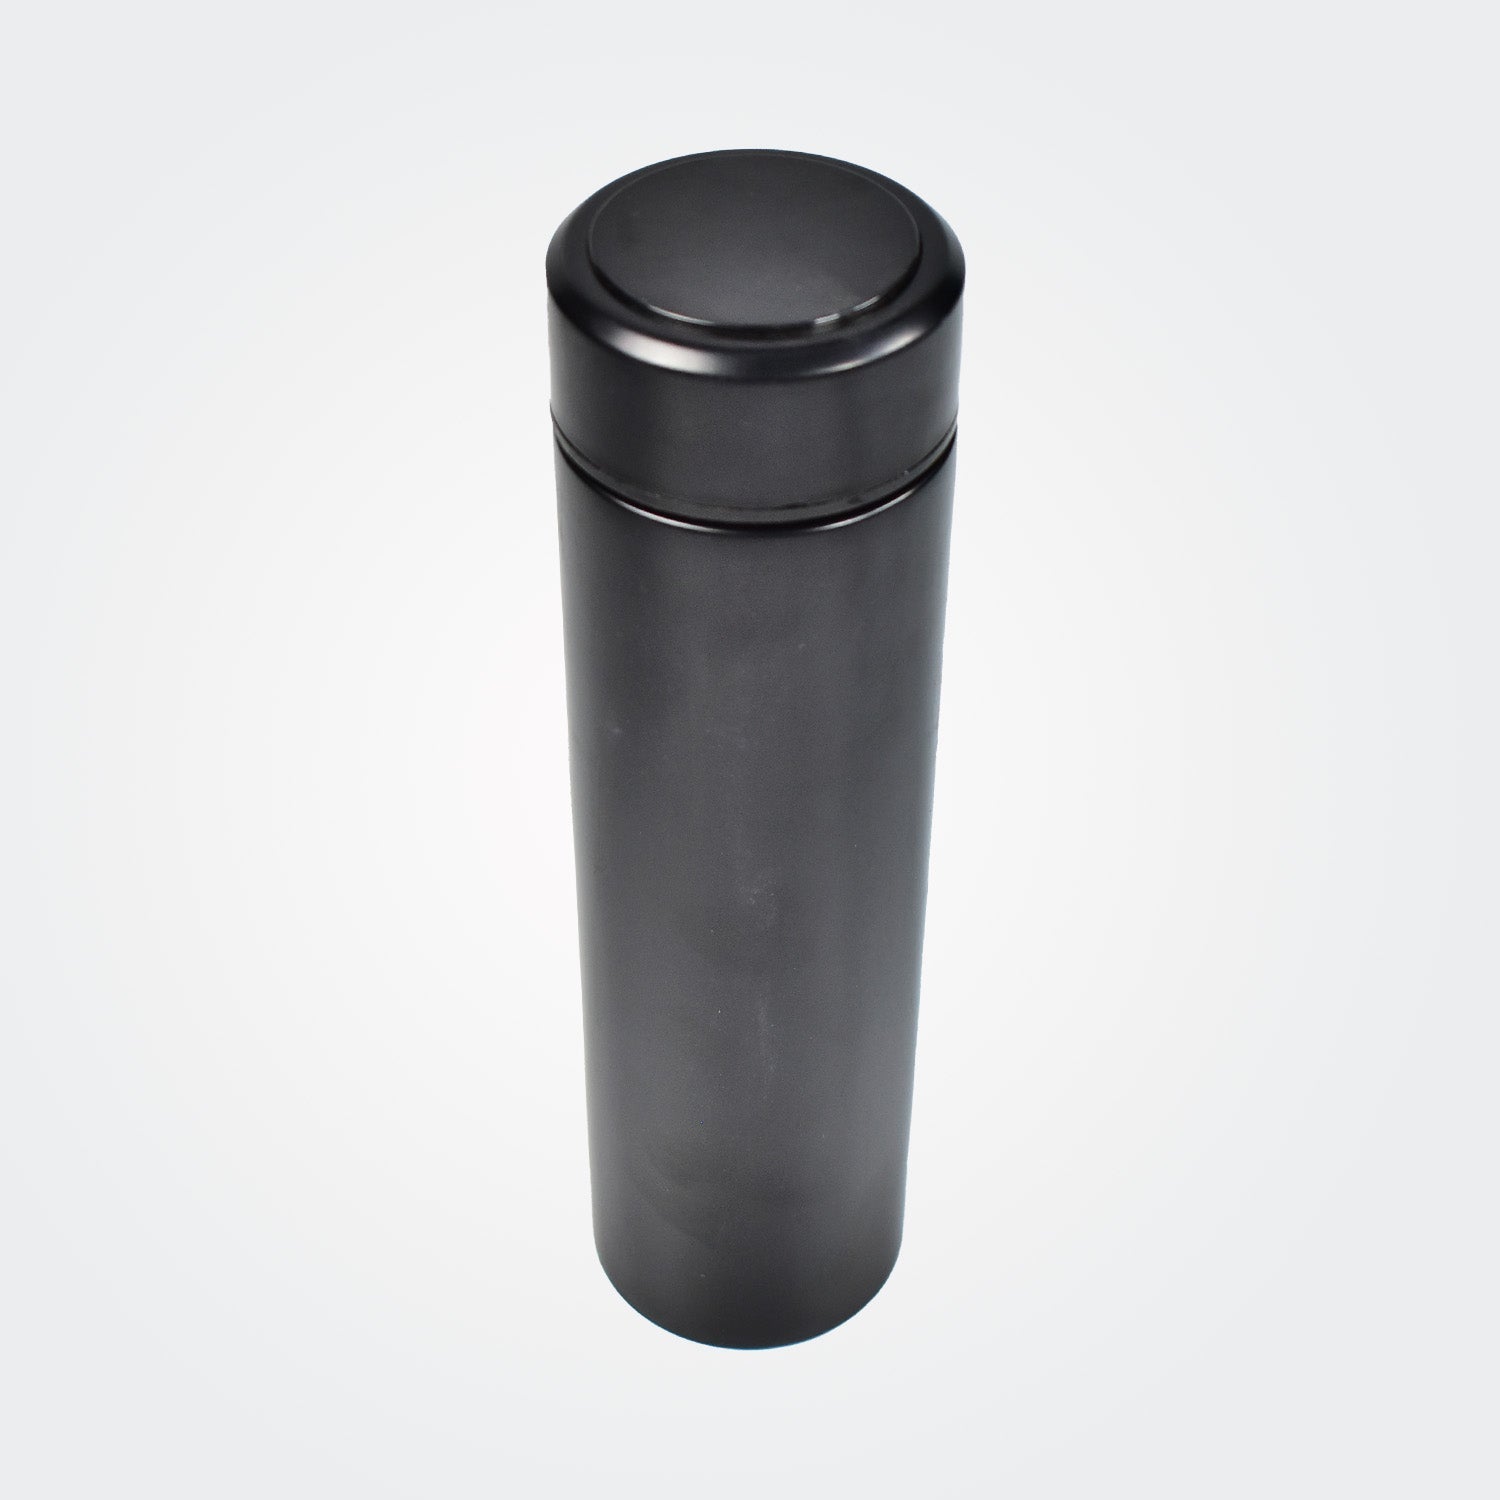 6838 500ml Vacuum Cup Portable Simple Modern Water Bottle, Vacuum Cup, for Home Business Use JK Trends